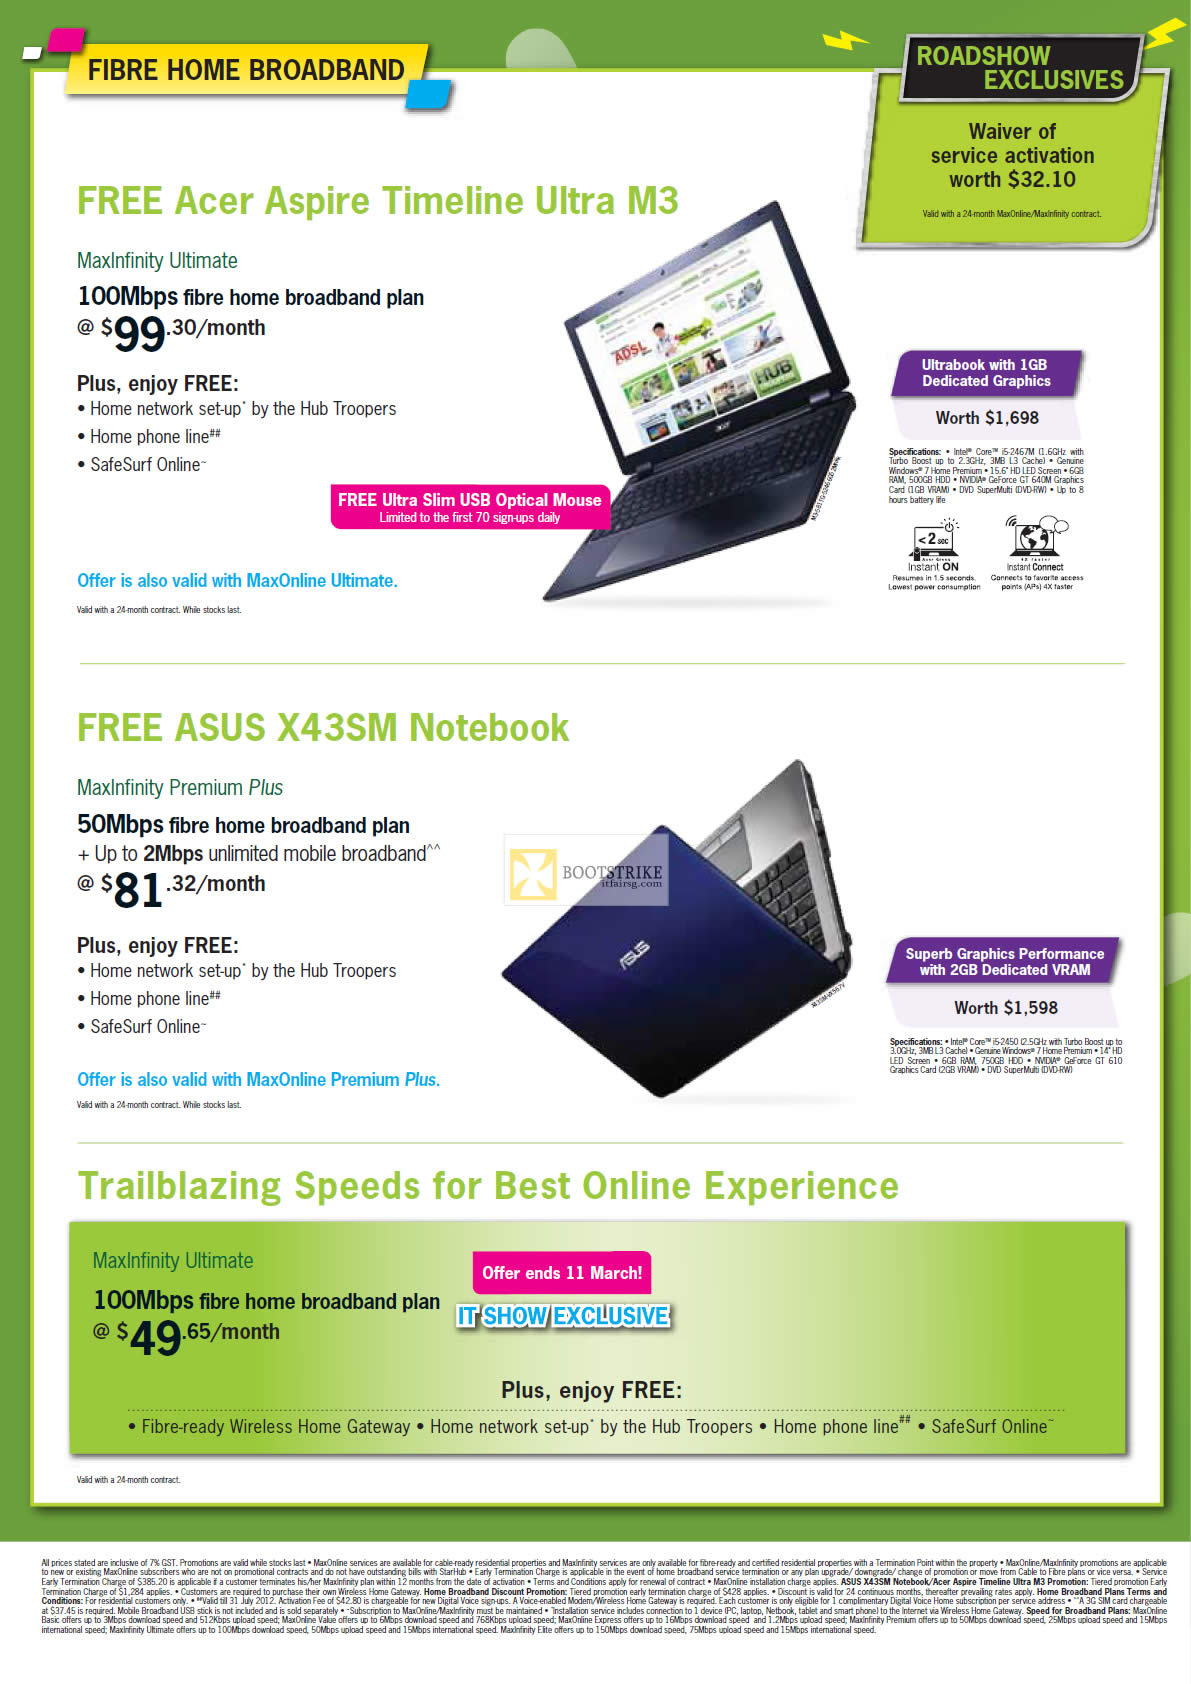 IT SHOW 2012 price list image brochure of Starhub Broadband Fibre Free Acer Aspire Timeline Ultra M3 Notebook Ultrabook, ASUS X43SM MaxInfinity Premium Plus, 100Mbps